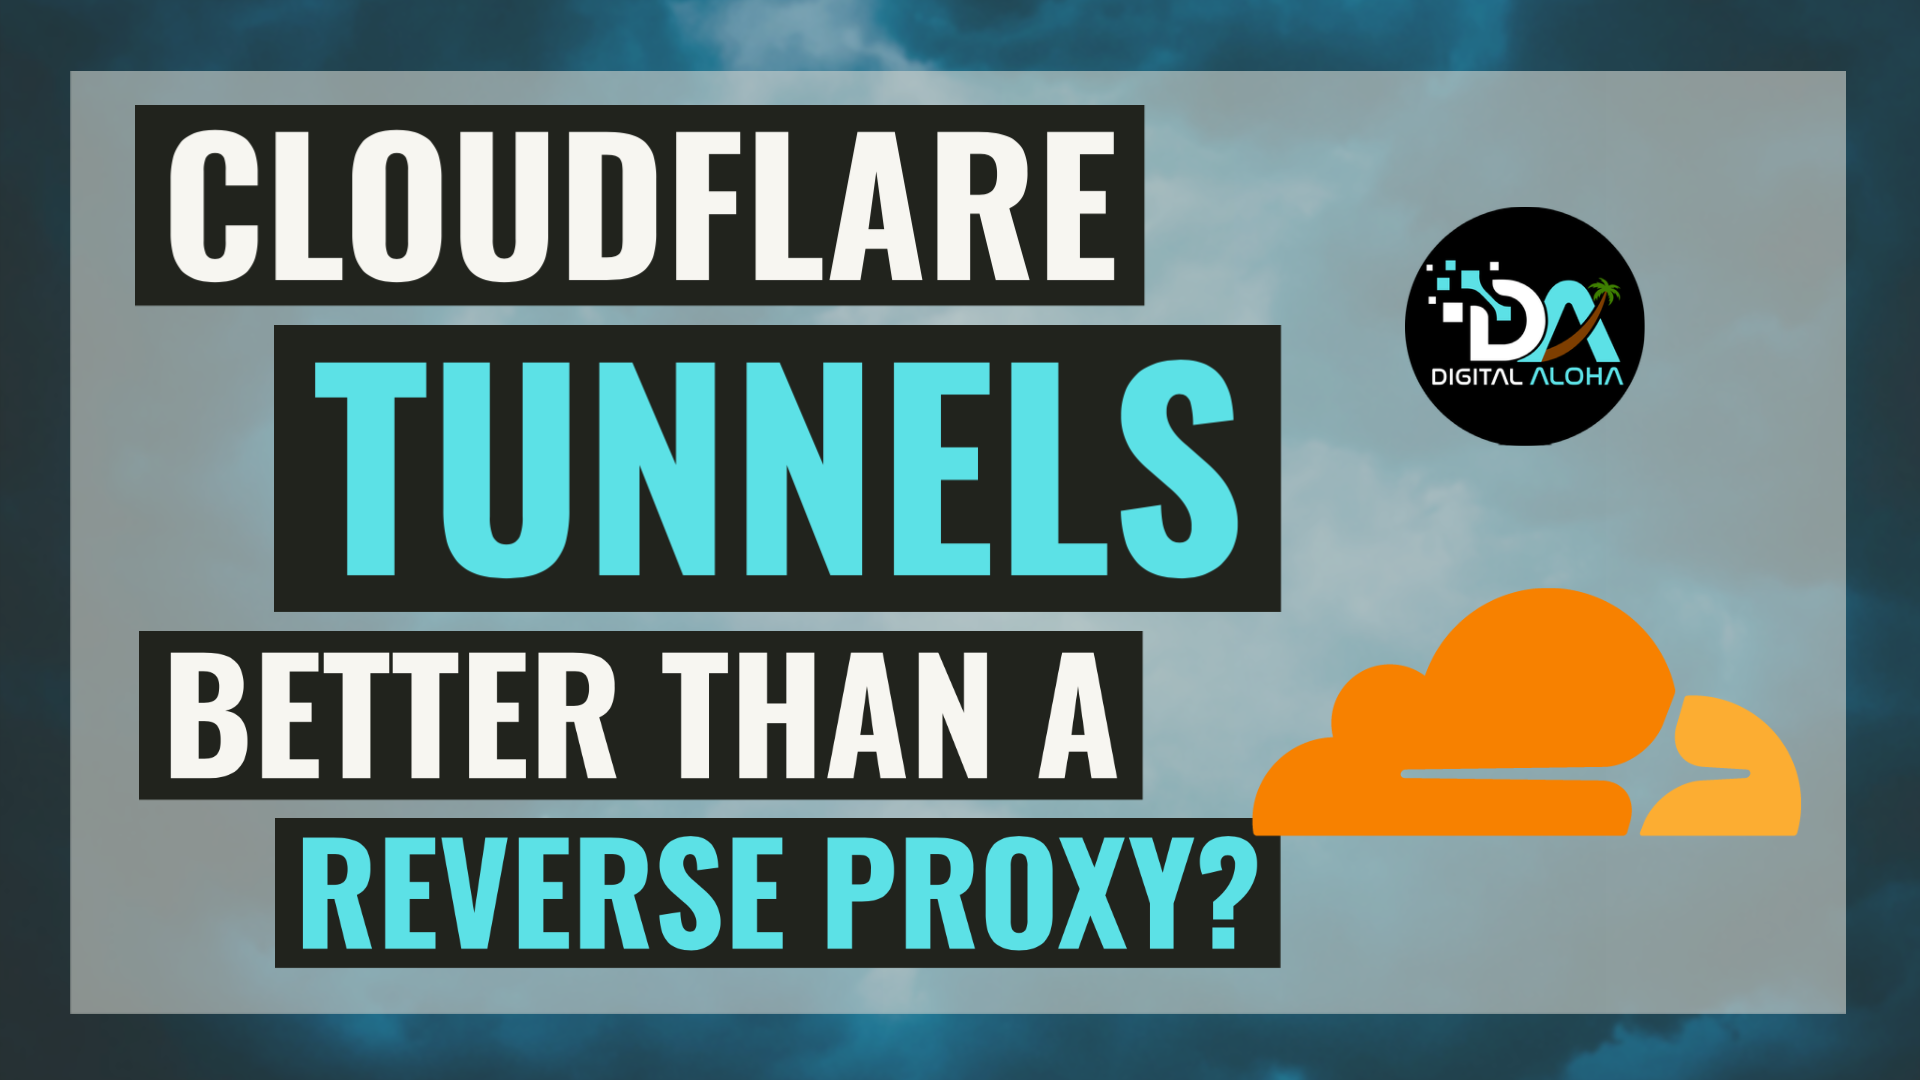 Setup Cloudflare Tunnels Instead Of A Reverse Proxy – No Port Forwarding Required